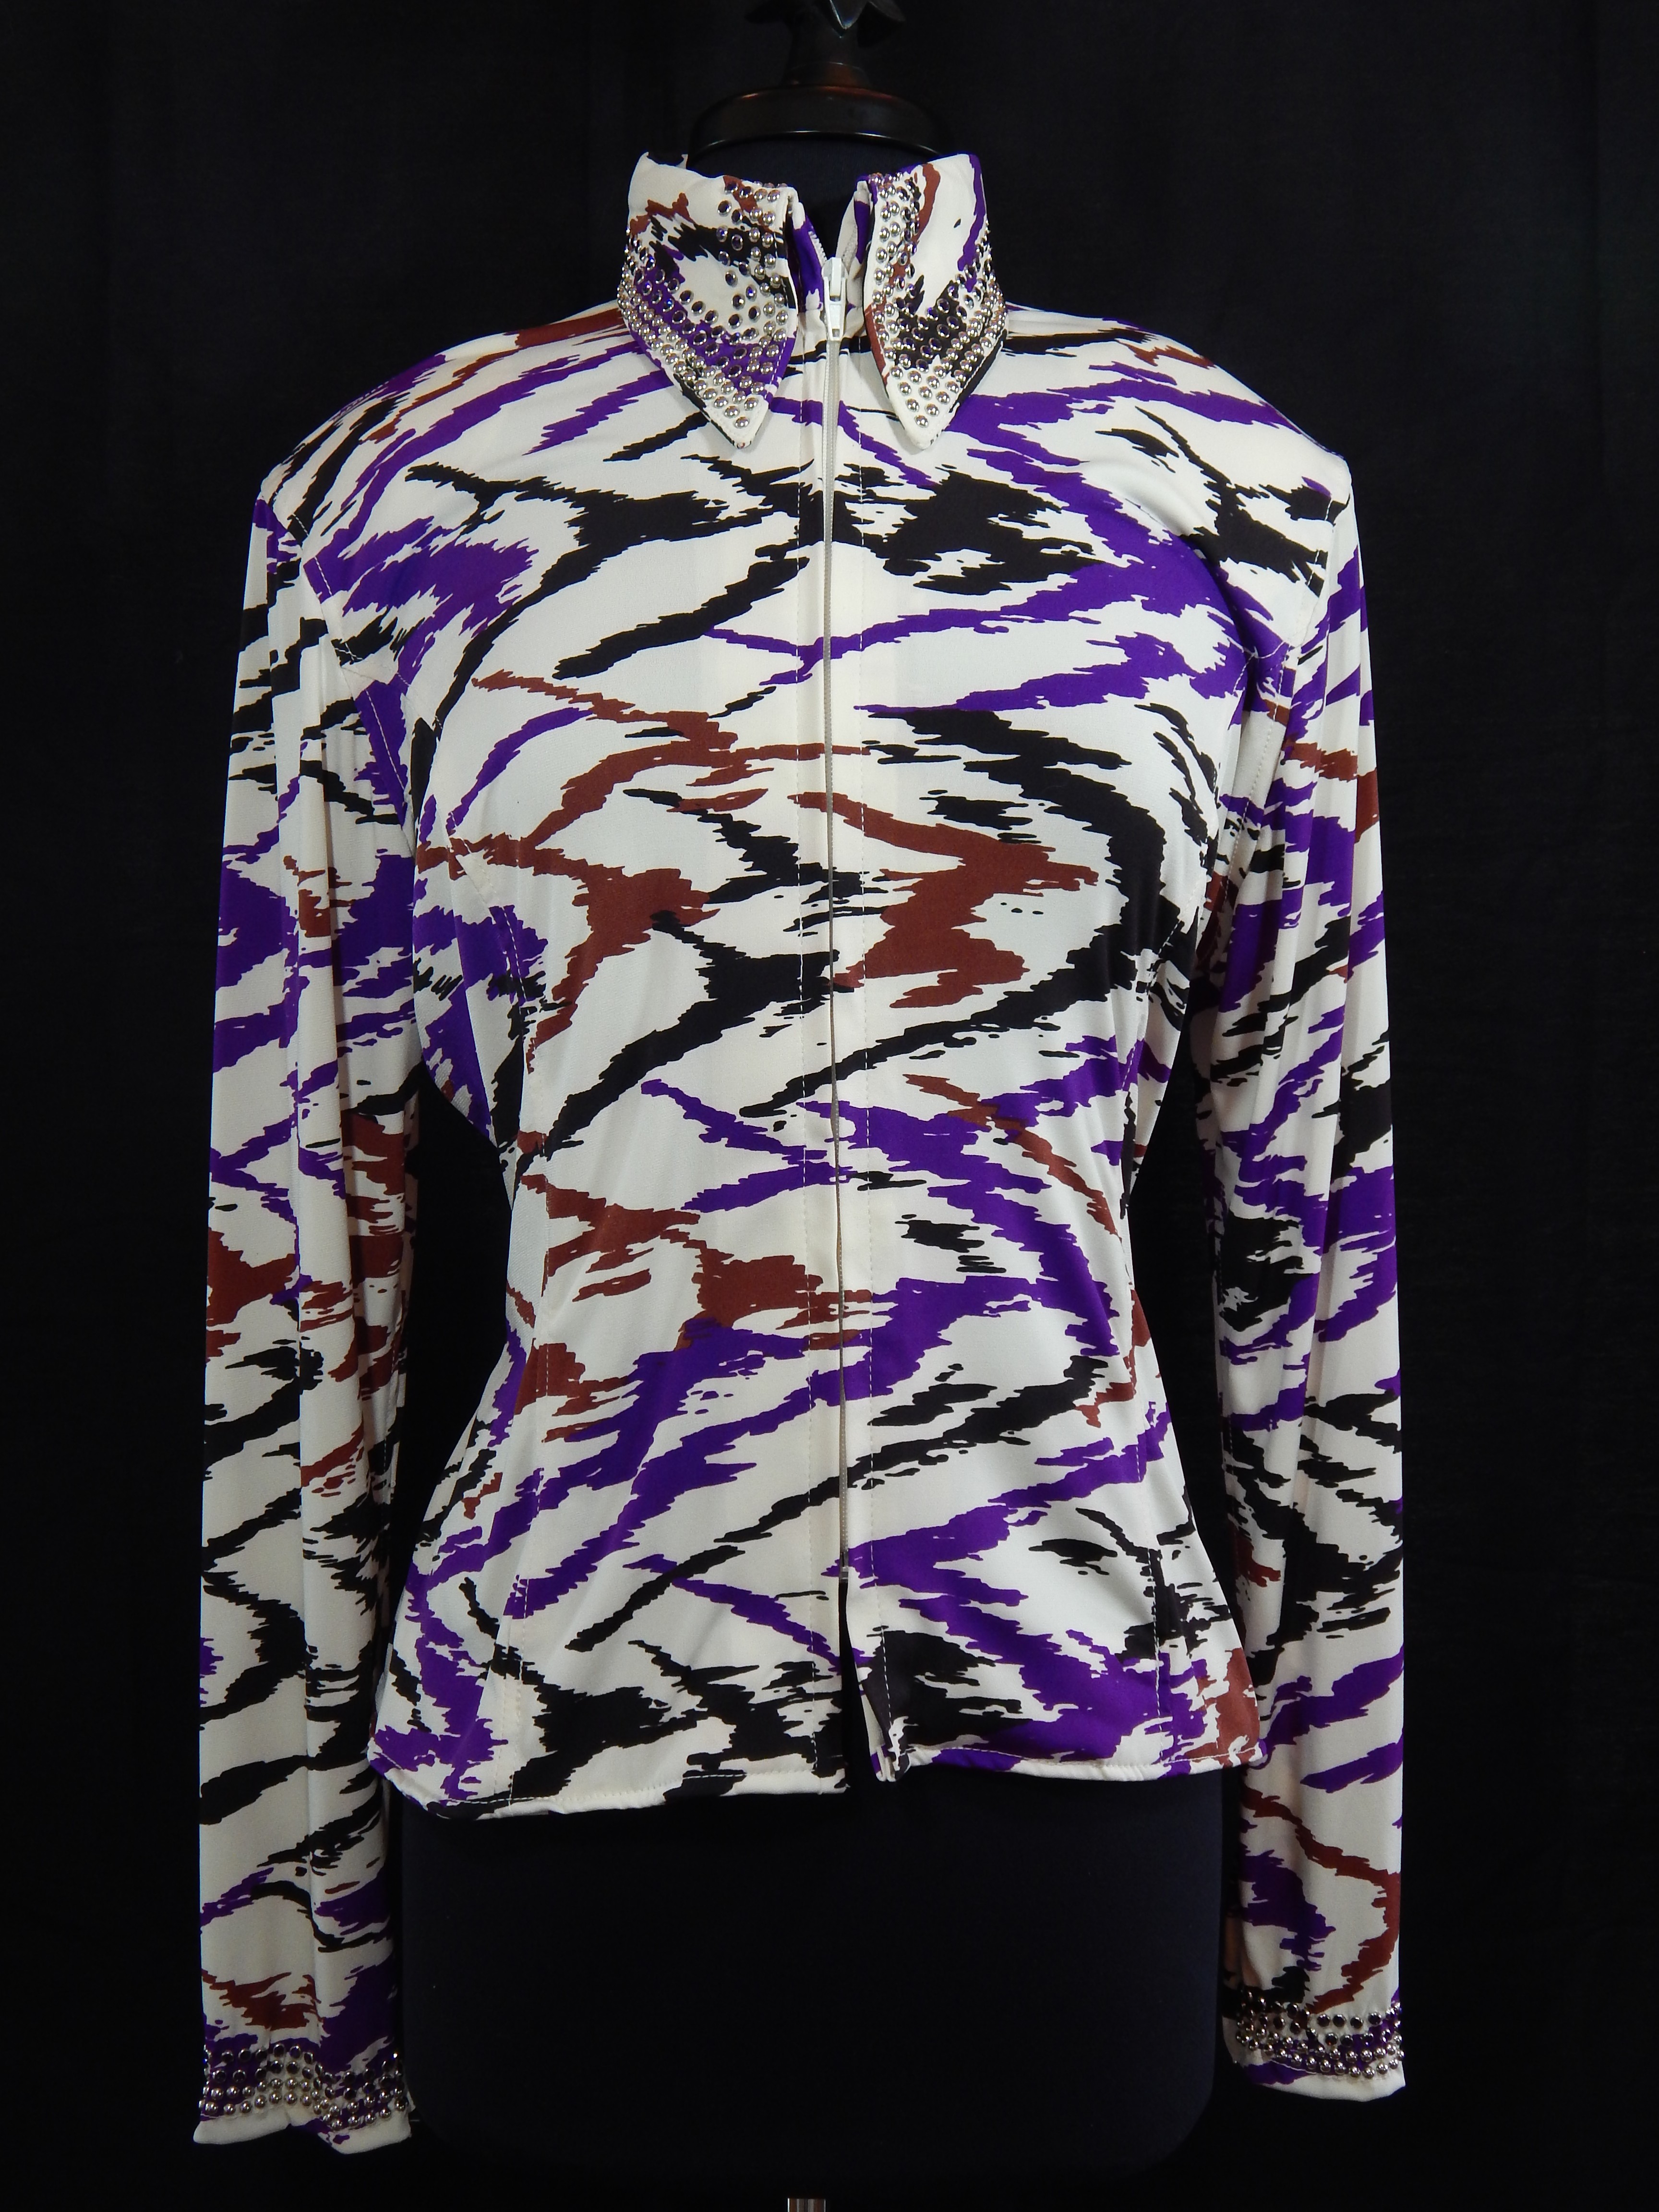 MKC Electric White, Purple, Black and Brown Horse Show Shirt